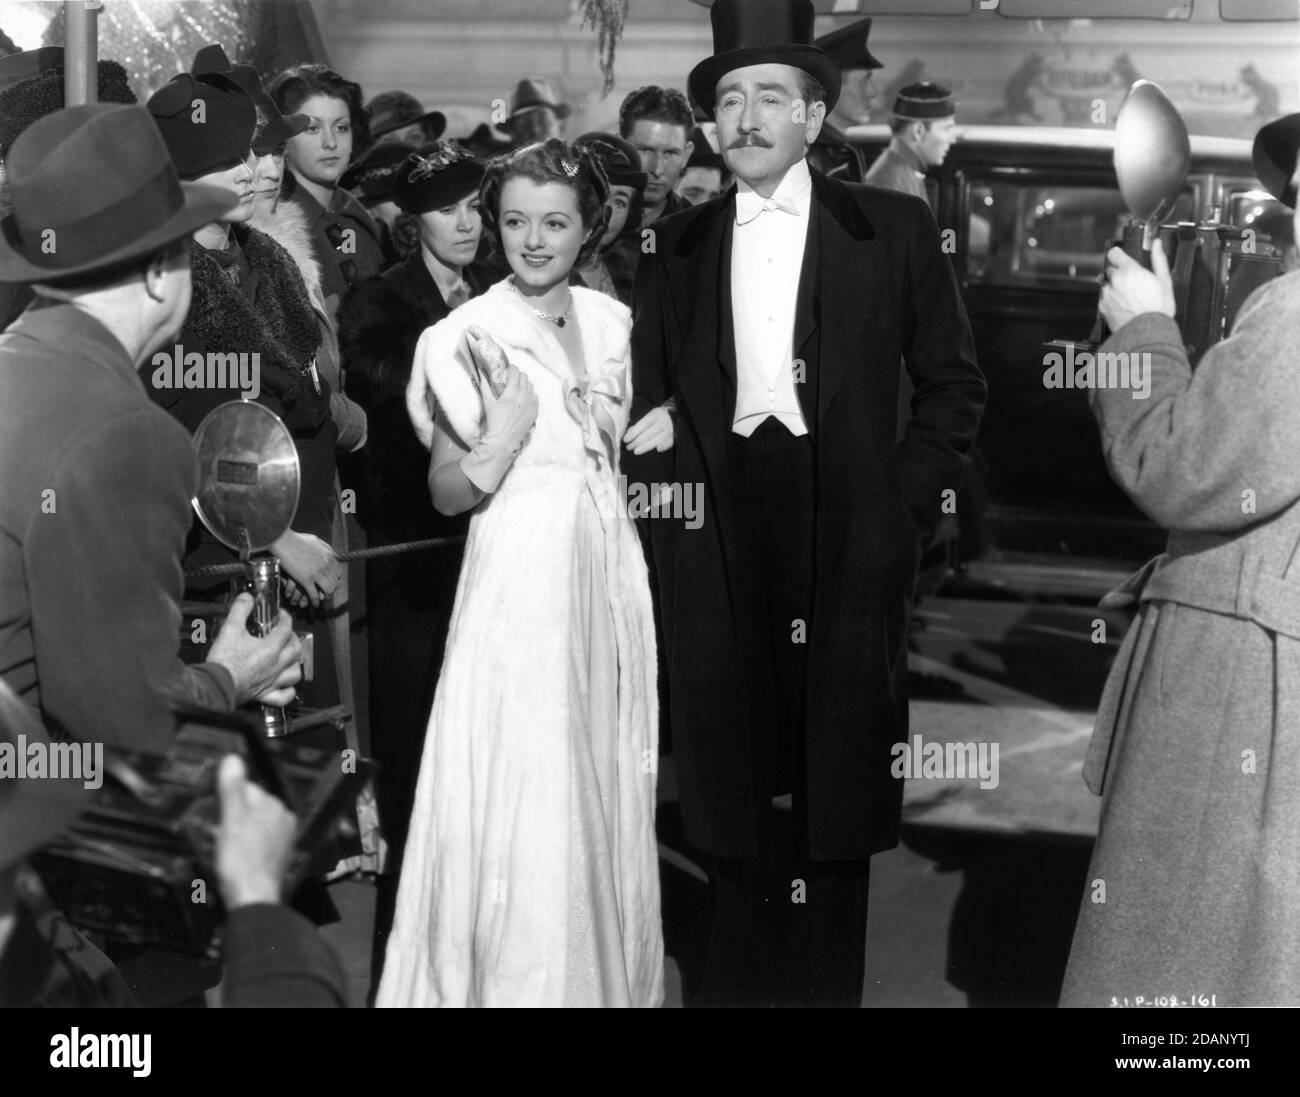 JANET GAYNOR and ADOLPHE MENJOU at Movie Premiere in A STAR IS BORN 1937 director WILLIAM A. WELLMAN story William A. Wellman and Robert Carson screenplay Dorothy Parker Alan Campbell and Robert Carson music Max Steiner producer David O. Selznick Selznick International Pictures / United Artists Stock Photo